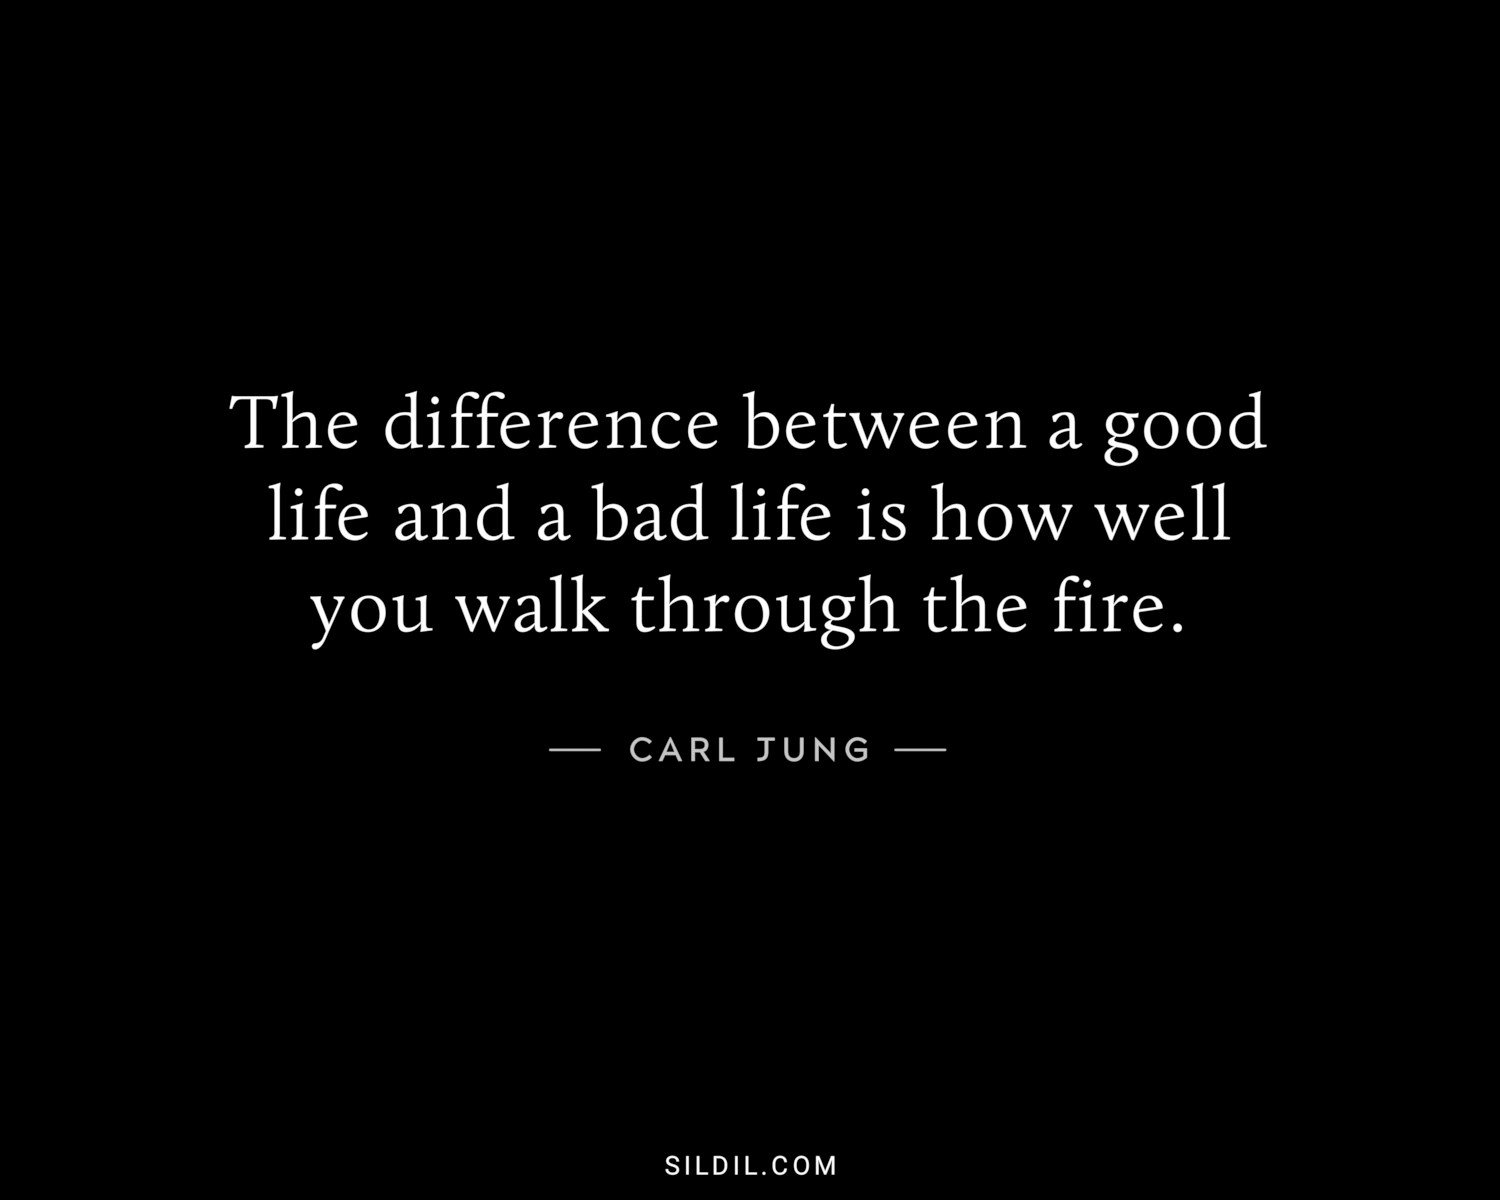 The difference between a good life and a bad life is how well you walk through the fire.